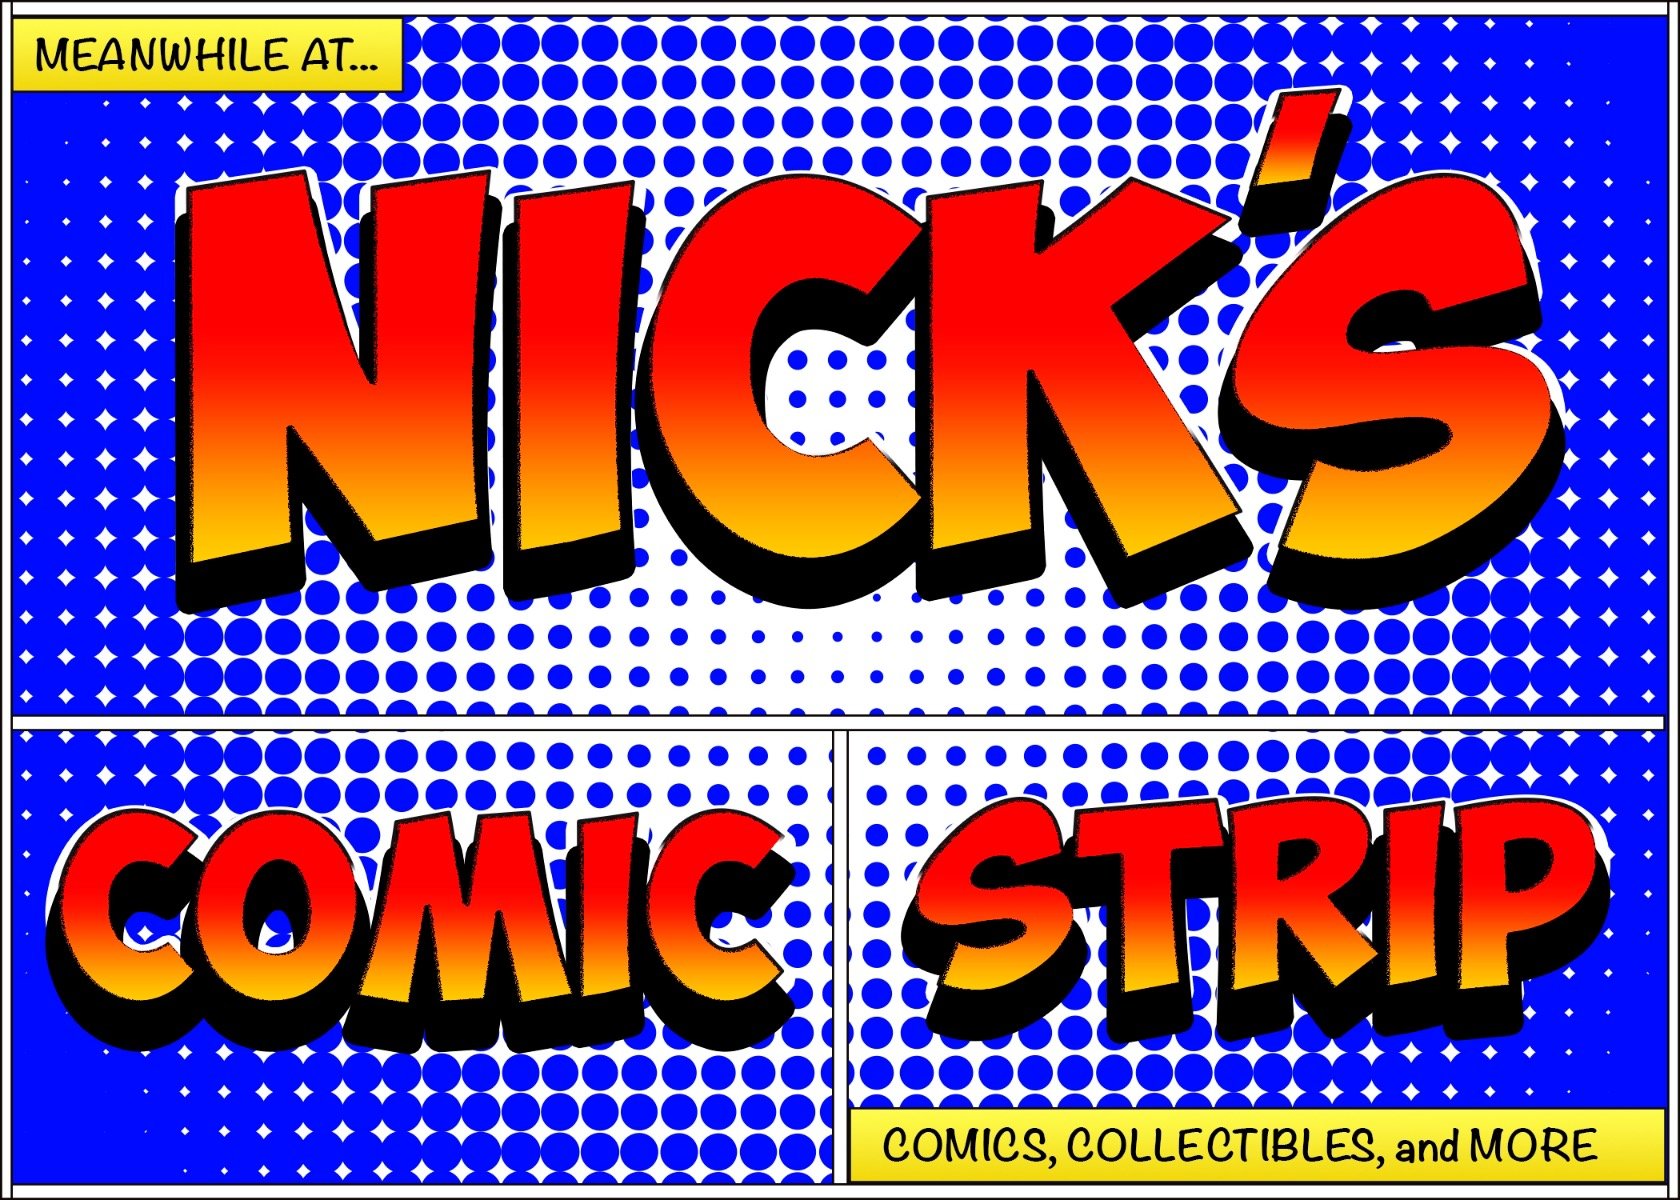 Nick's Comic Strip is a comic, collectible, and pop culture store in Middleton, MA. No matter your fandom we have what you're looking for.